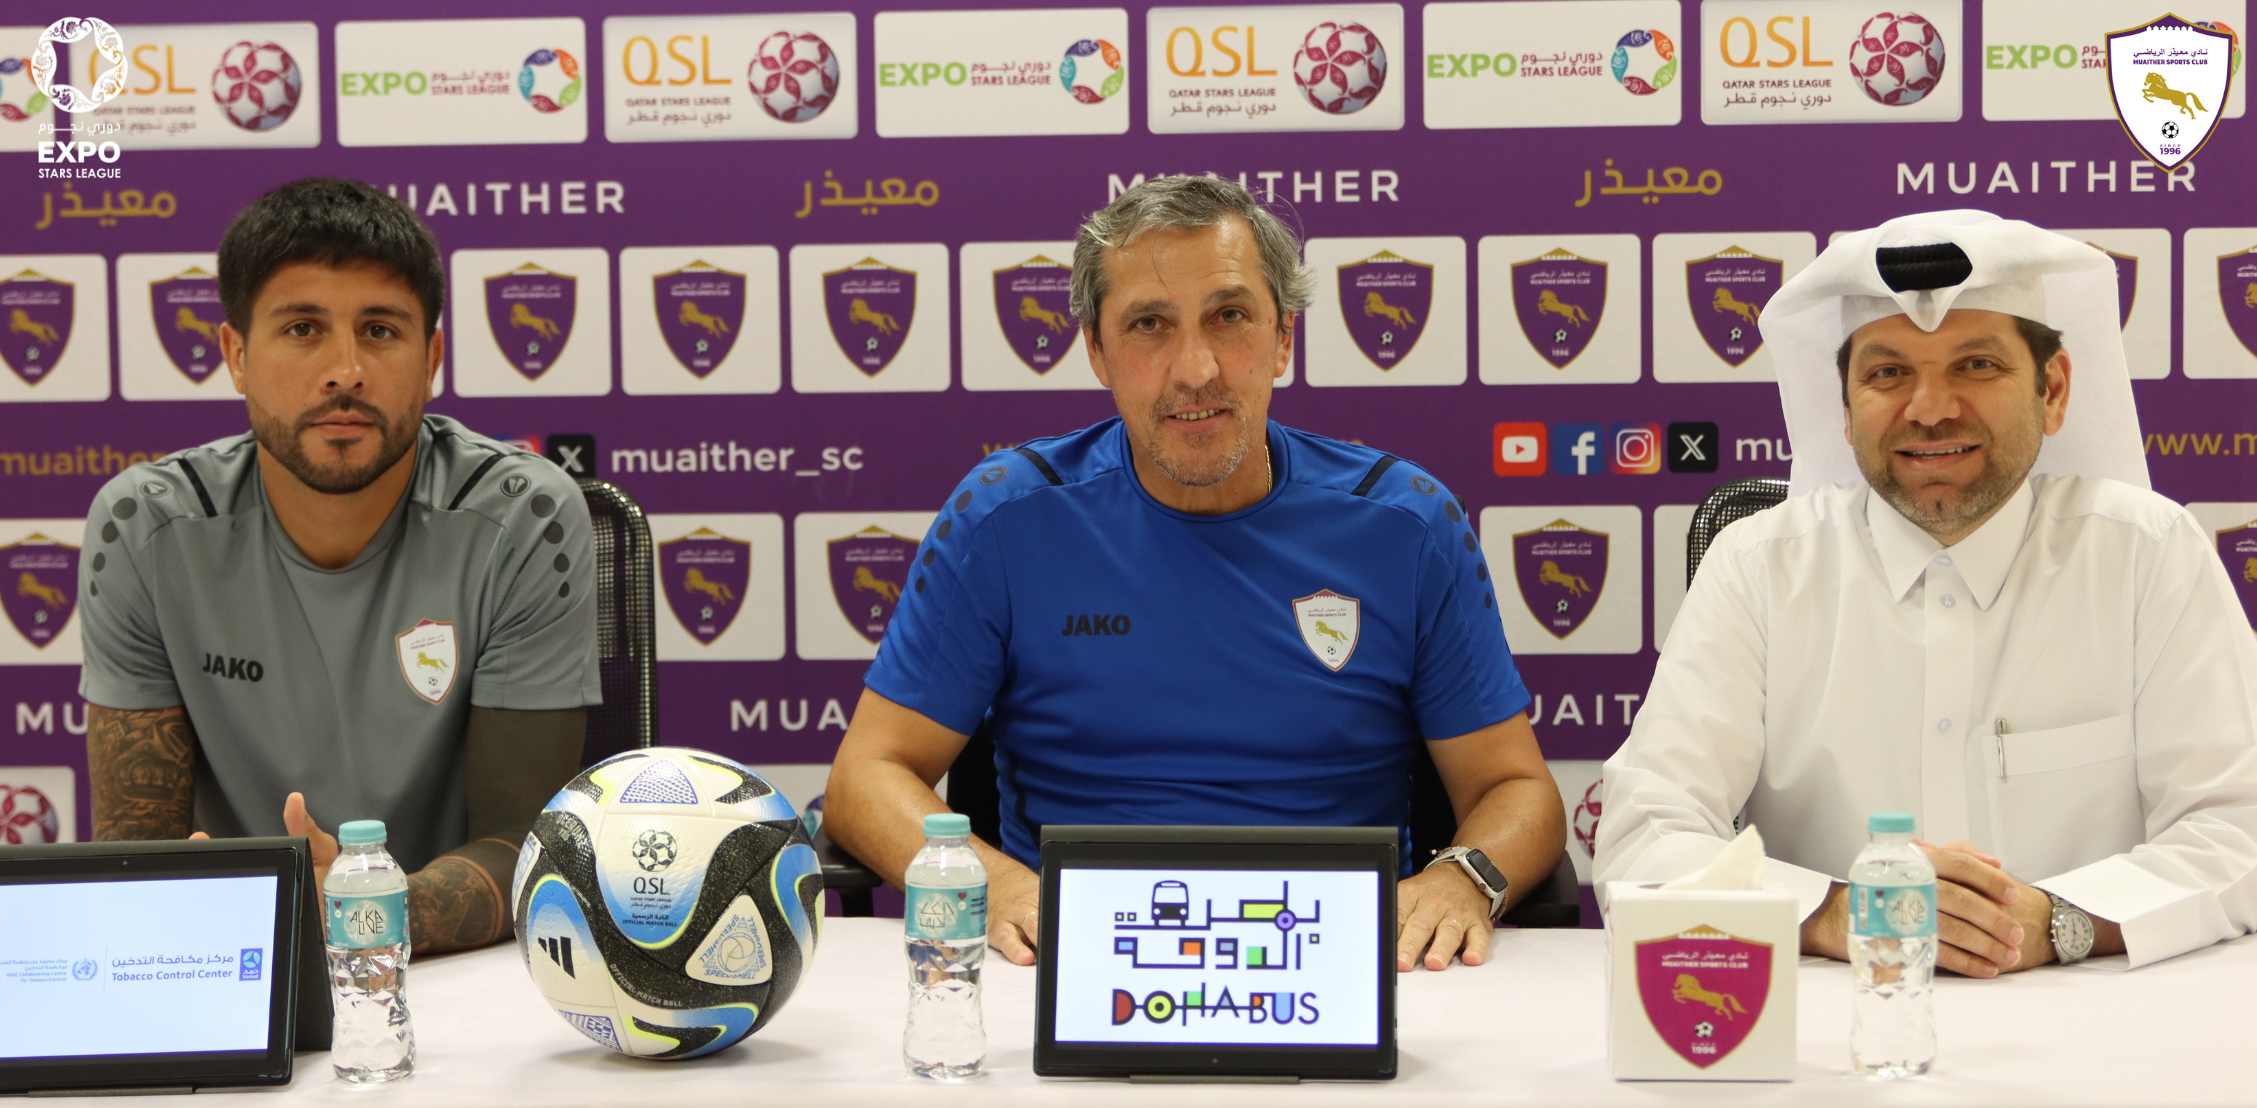 We are ready for a difficult match withAl Duhail match, and we seek to snatch the three points